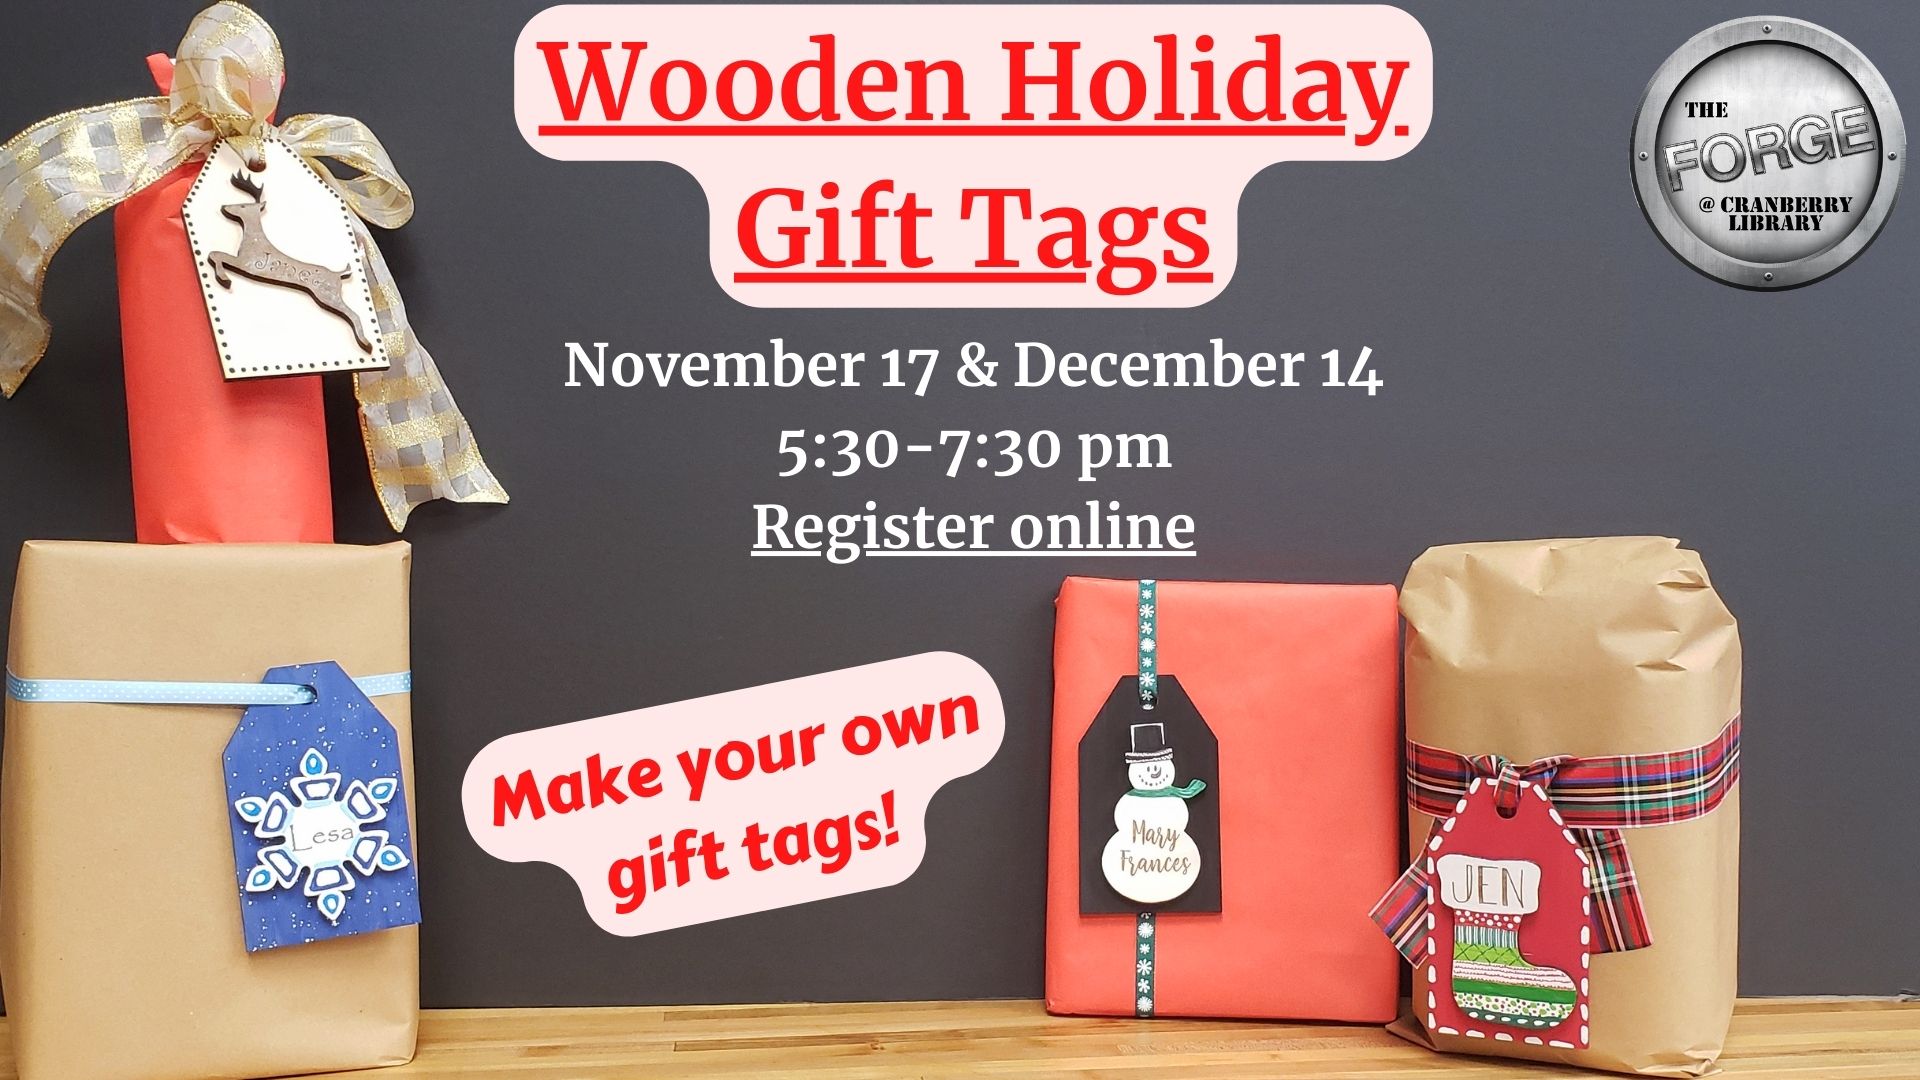 Flyer with wooden holiday gift tags